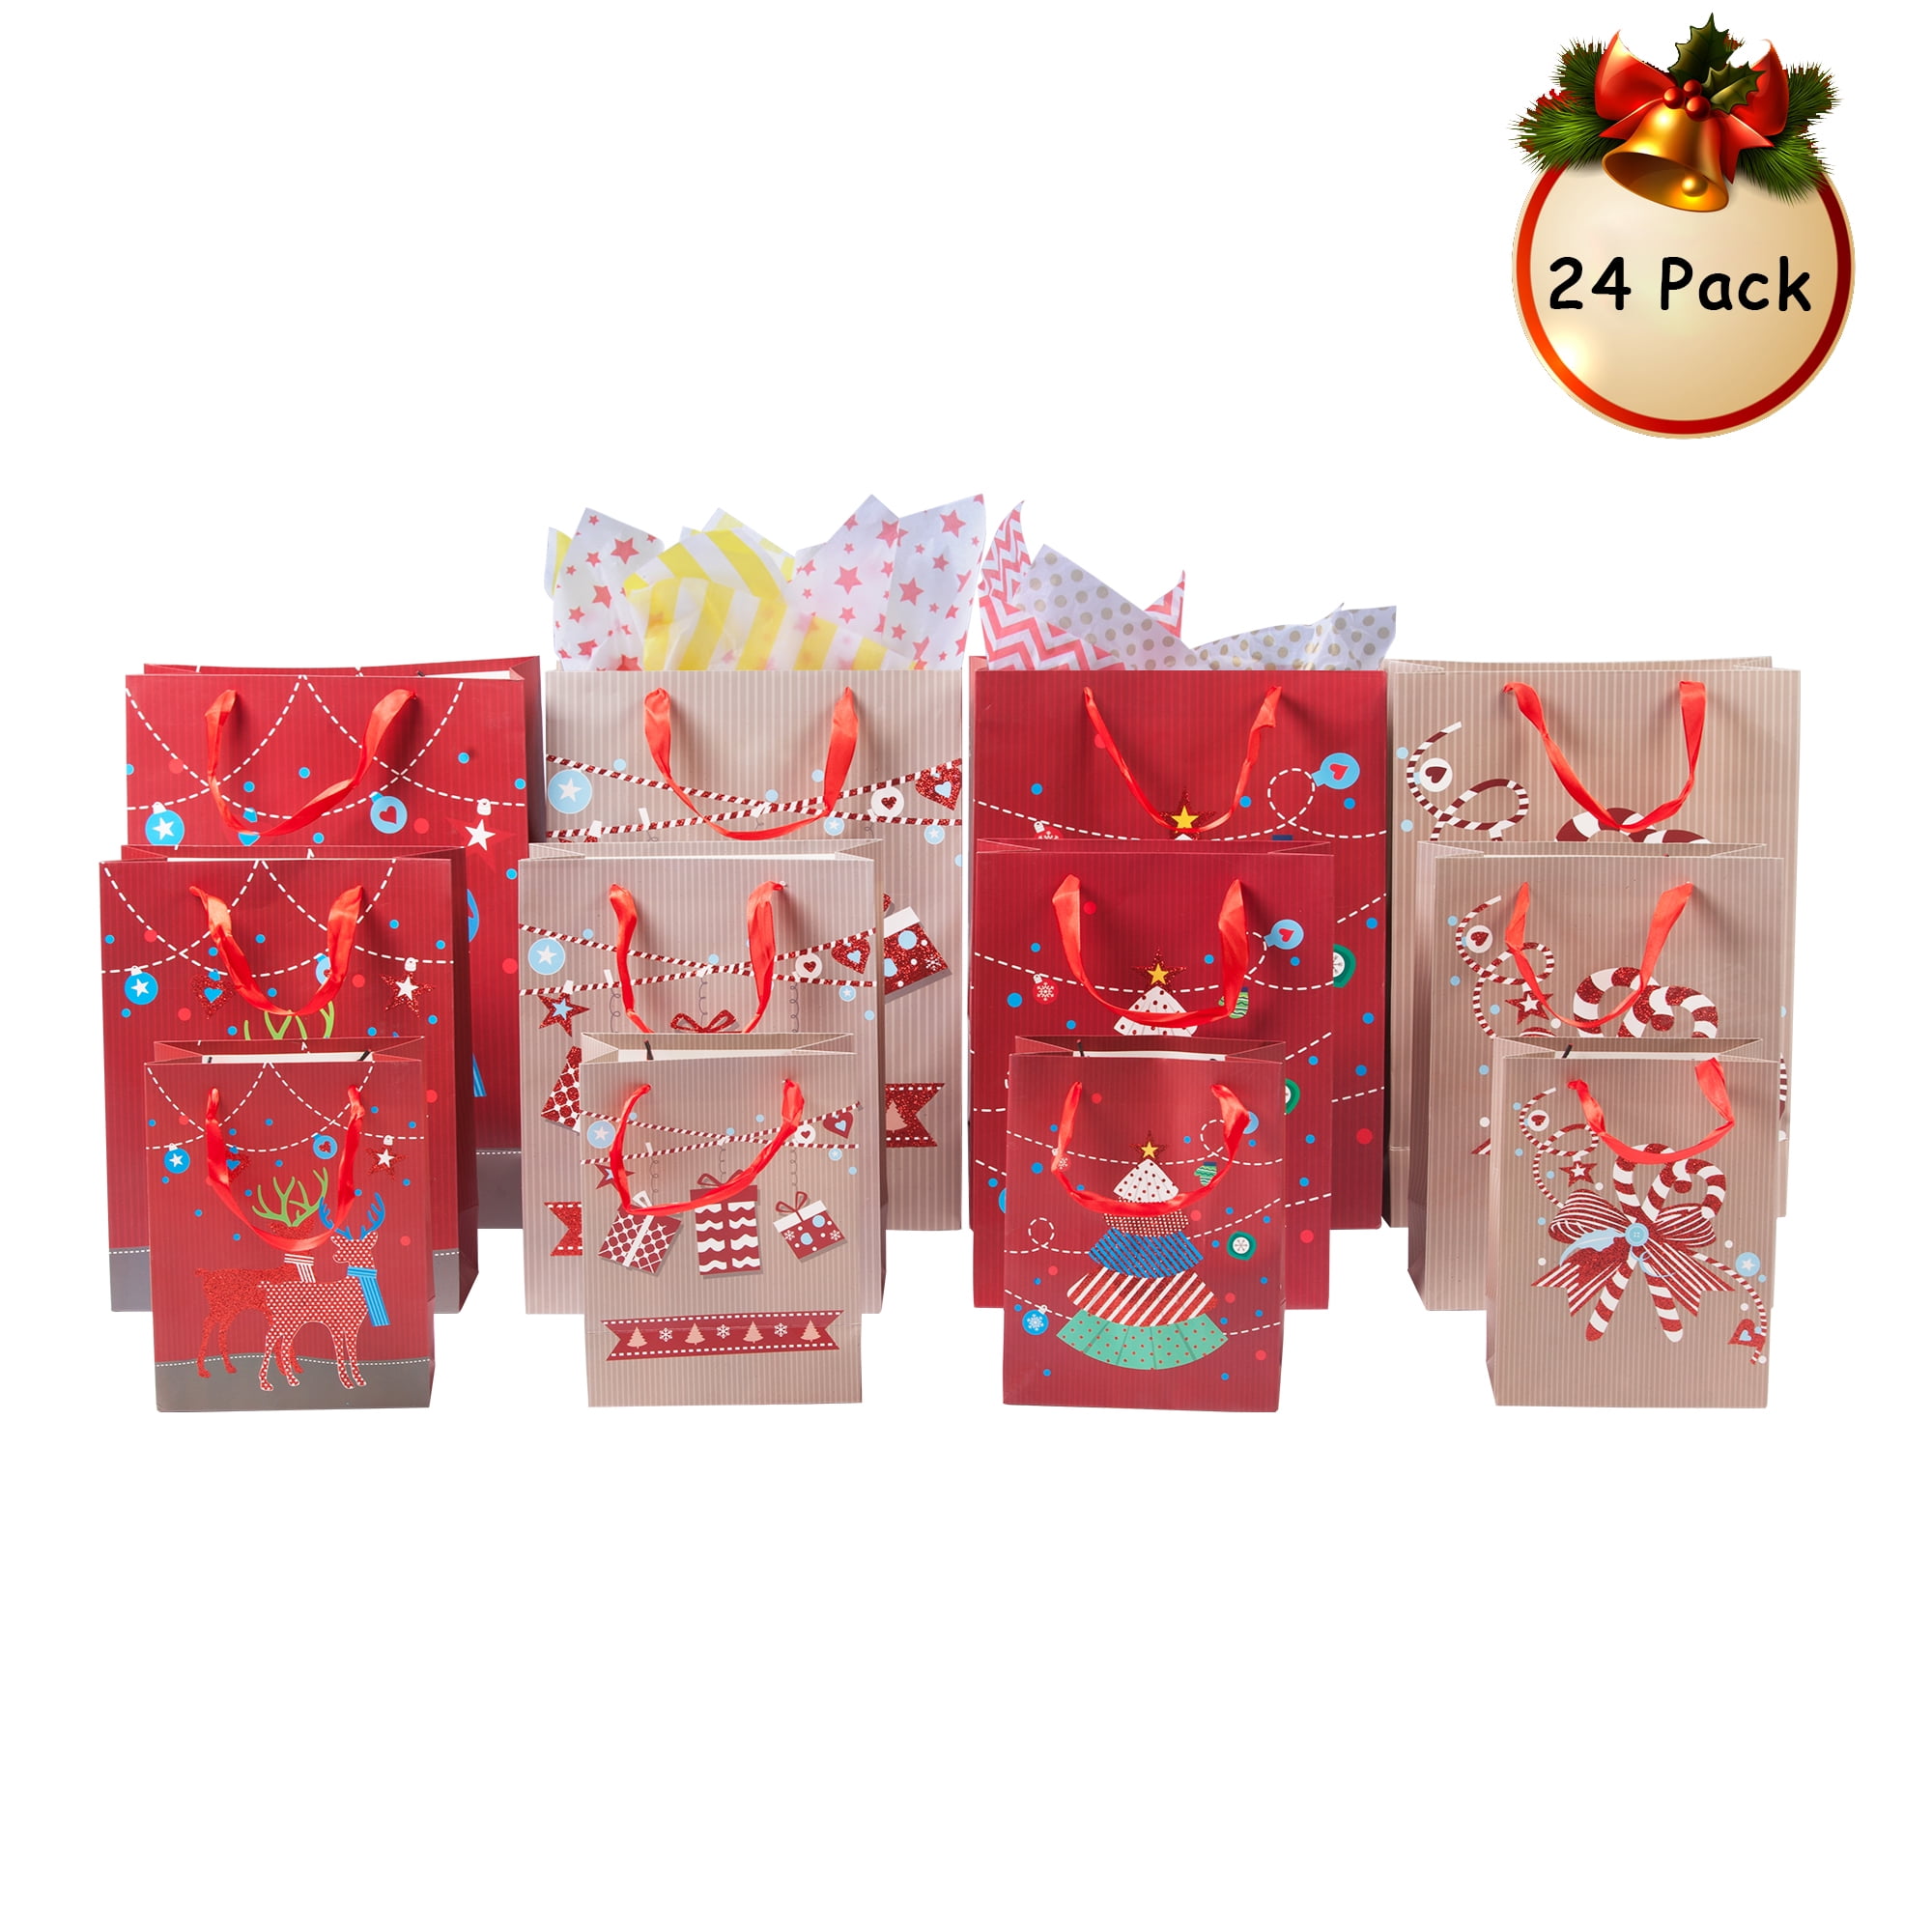 100cm Gift Wrapping Paper Storage Bag Organiser Xmas Party Wrap Paper Bag 